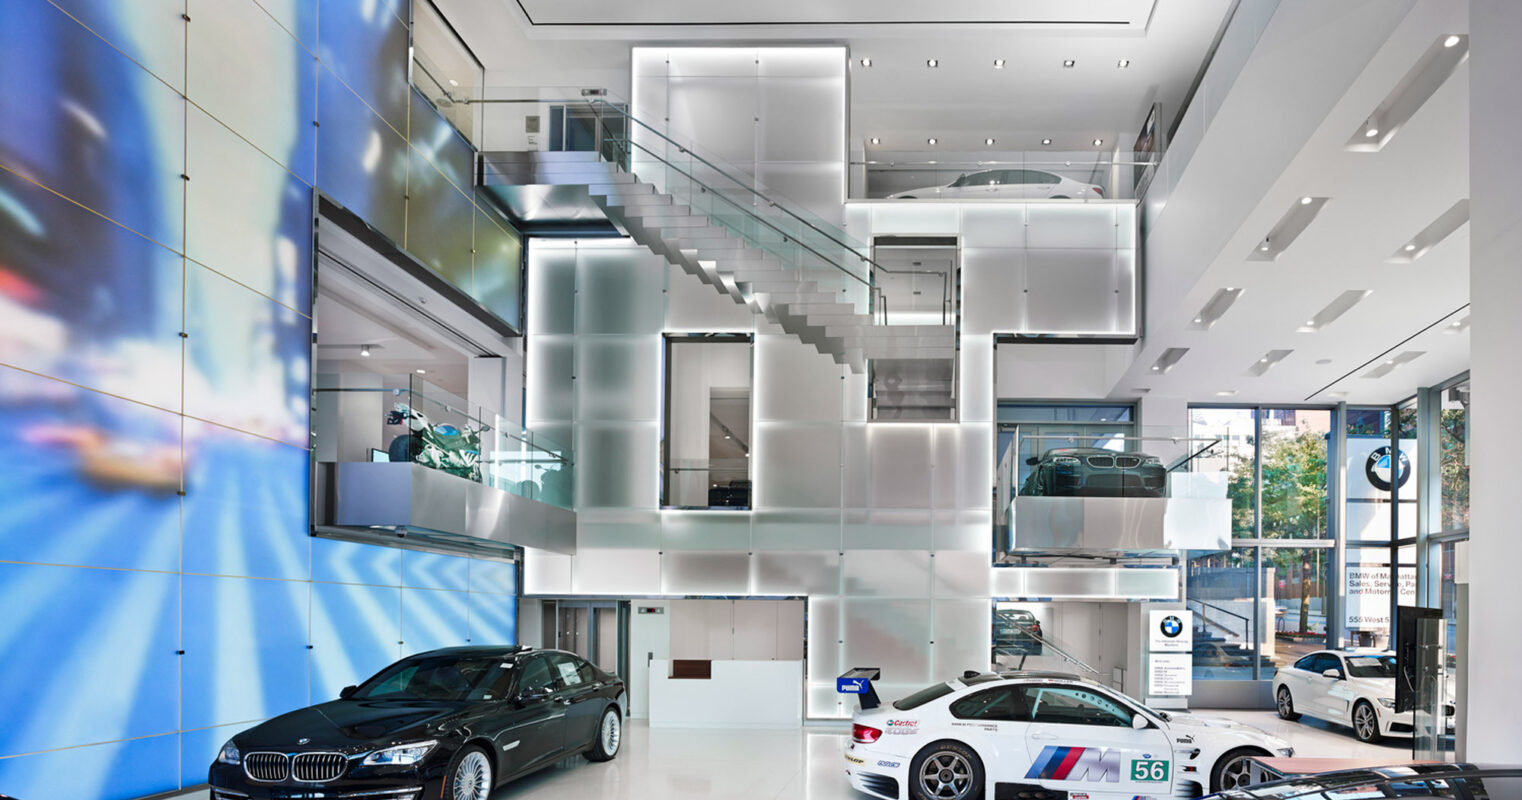 Spacious, modern car showroom with high ceilings, featuring a prominent, geometric glass and metal staircase leading to an upper level. Gleaming luxury vehicles are arranged below on a polished concrete floor, flanked by sleek, white support columns. Dynamic blue ambient lighting enhances the futuristic ambiance.